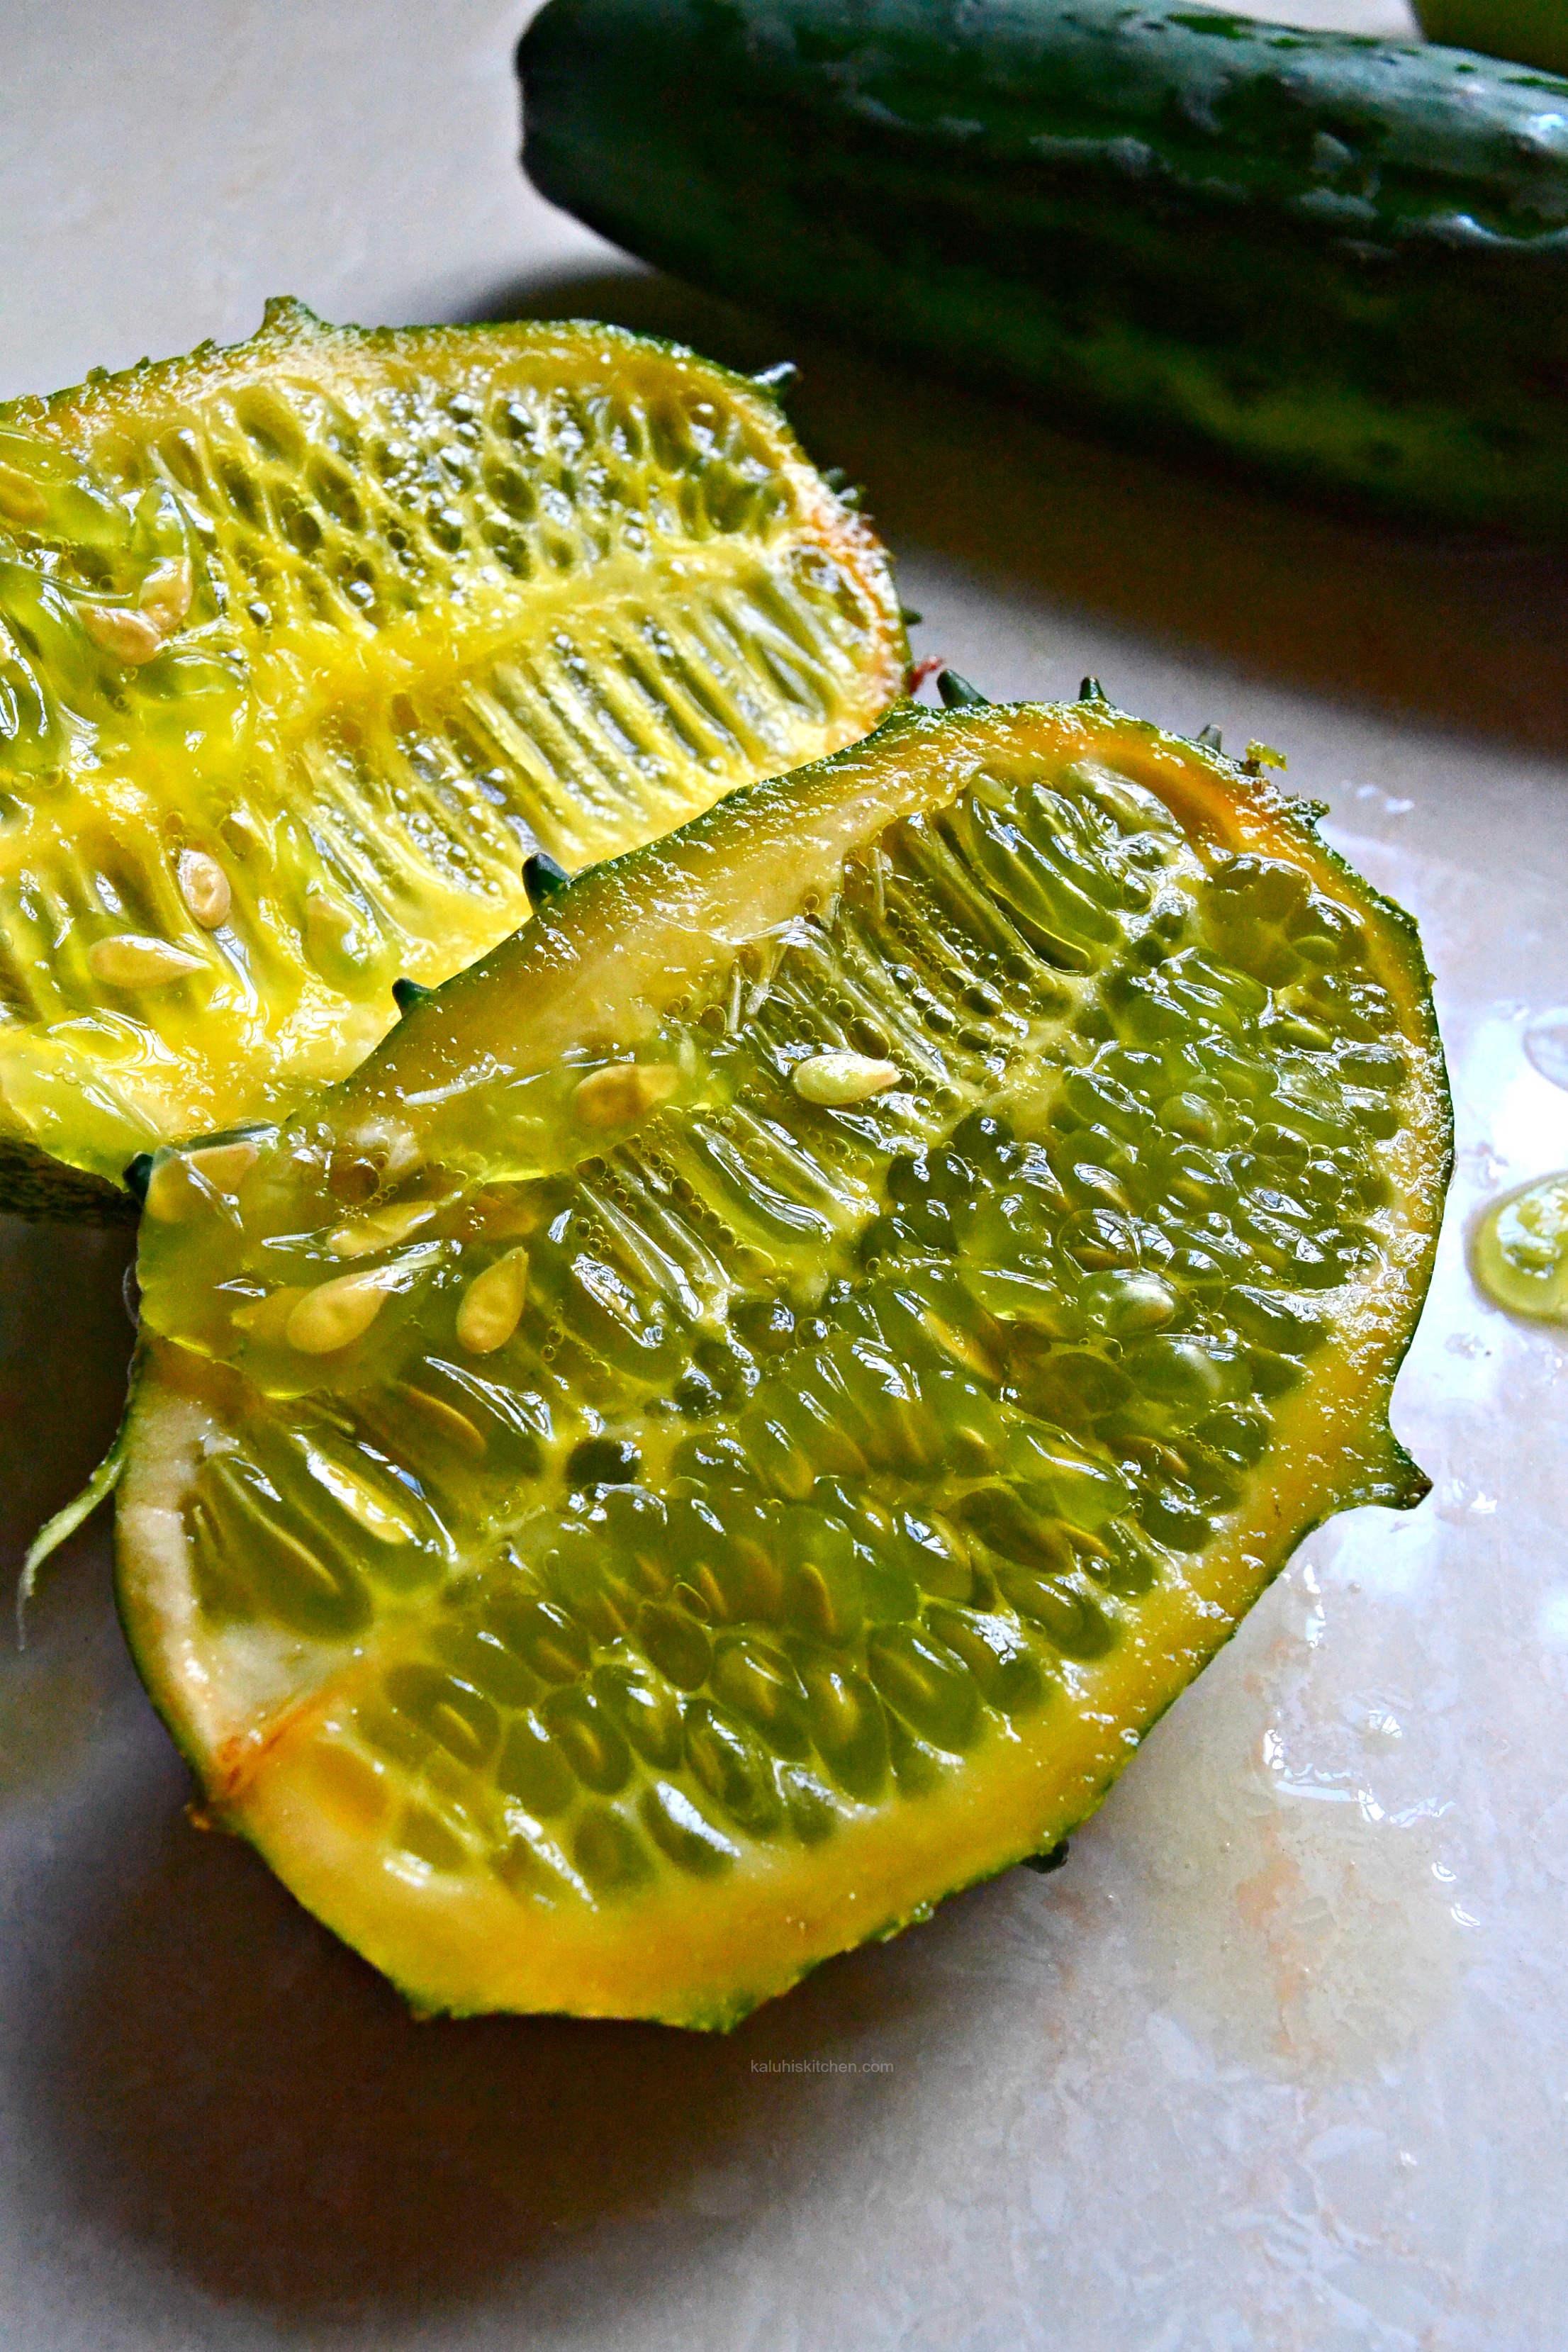 thorned-melon-or-horned-melon-is-a-healthy-fruit-rich-in-anti-oxidants-vitamins-and-anit-inflamatory-properties_kaluhiskitchen-com